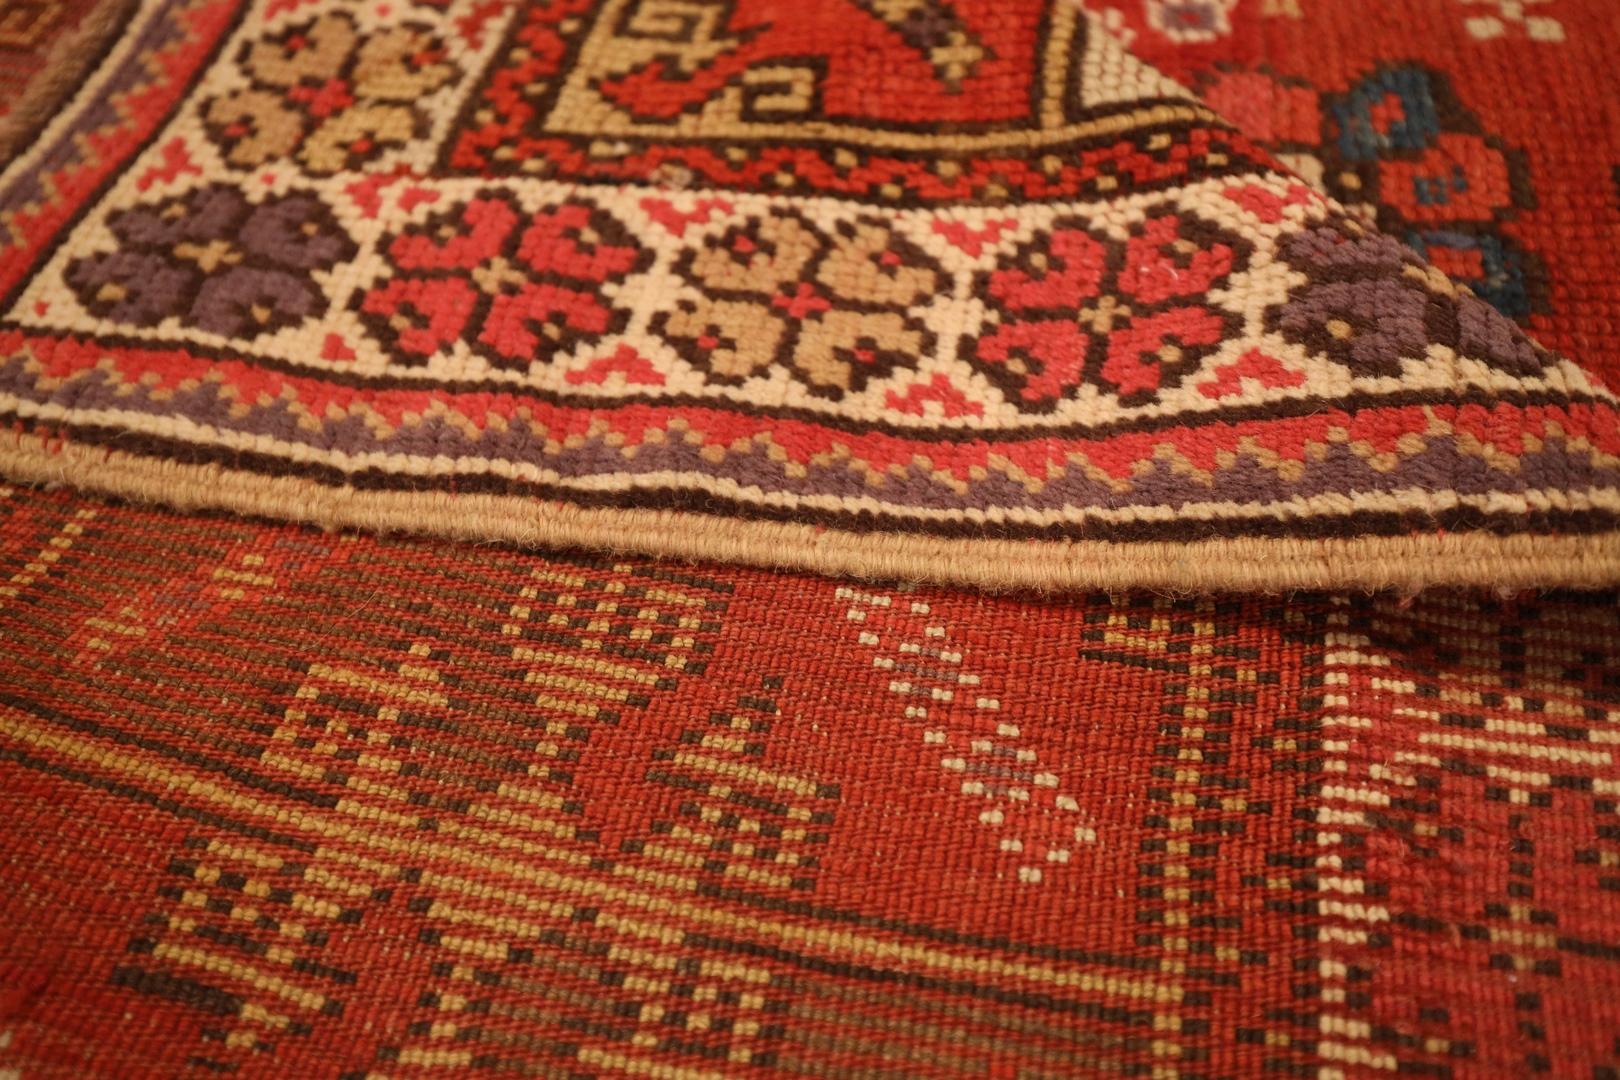 Turkish Antique Rug, Red Ivory Aubergine - 4 x 6 For Sale 1